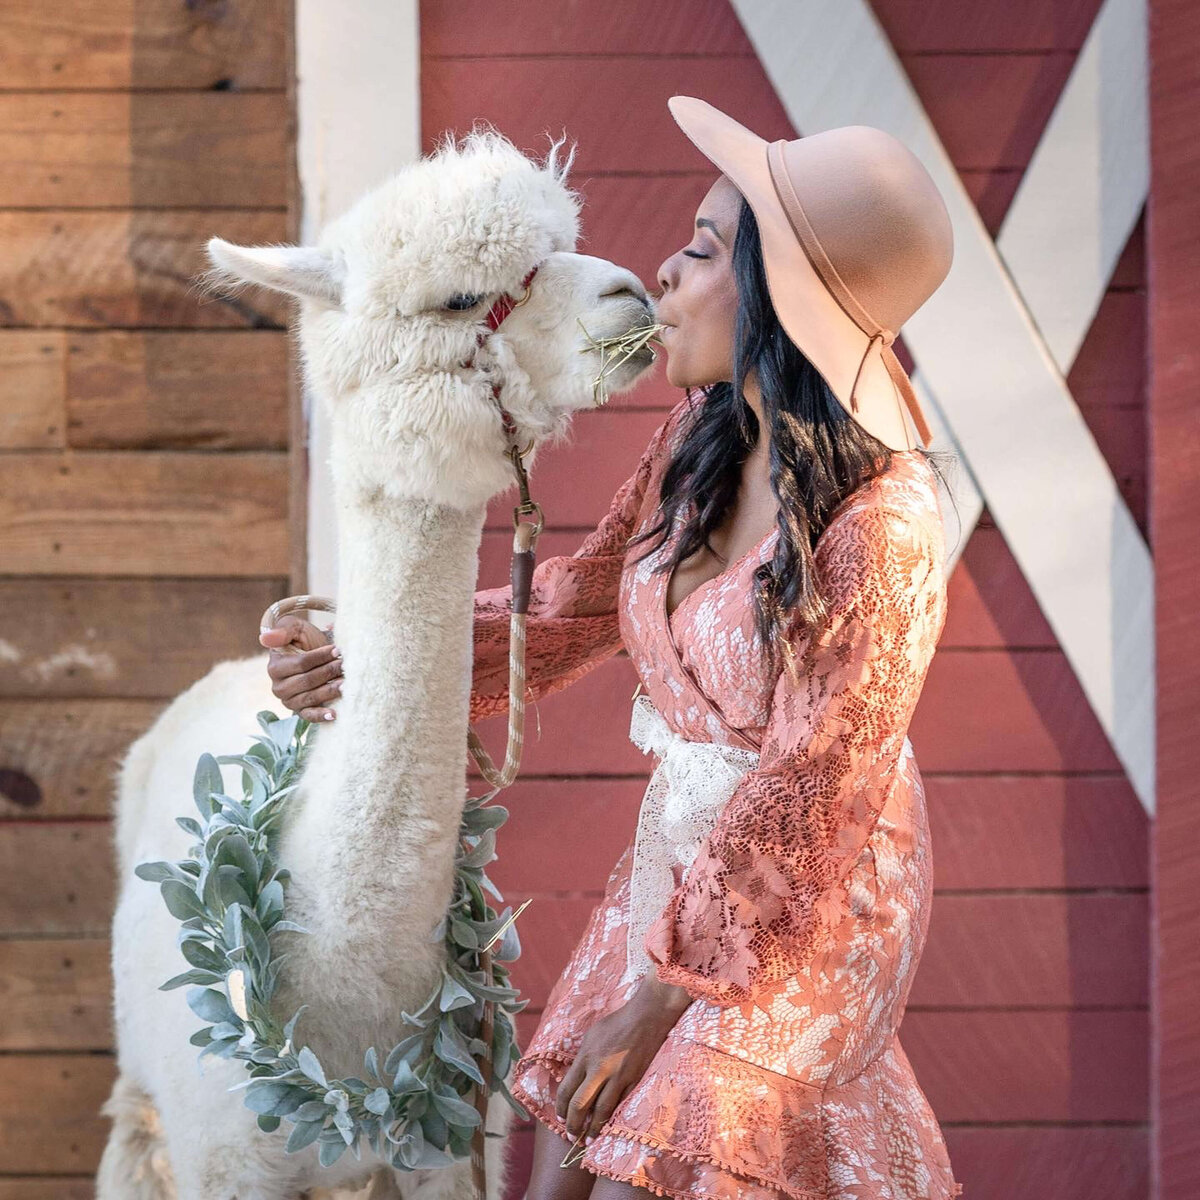 girls wearing a hat kissing an alpaca on her senior photo session at Lost mountain alpaca ranch, powder spring Georgia